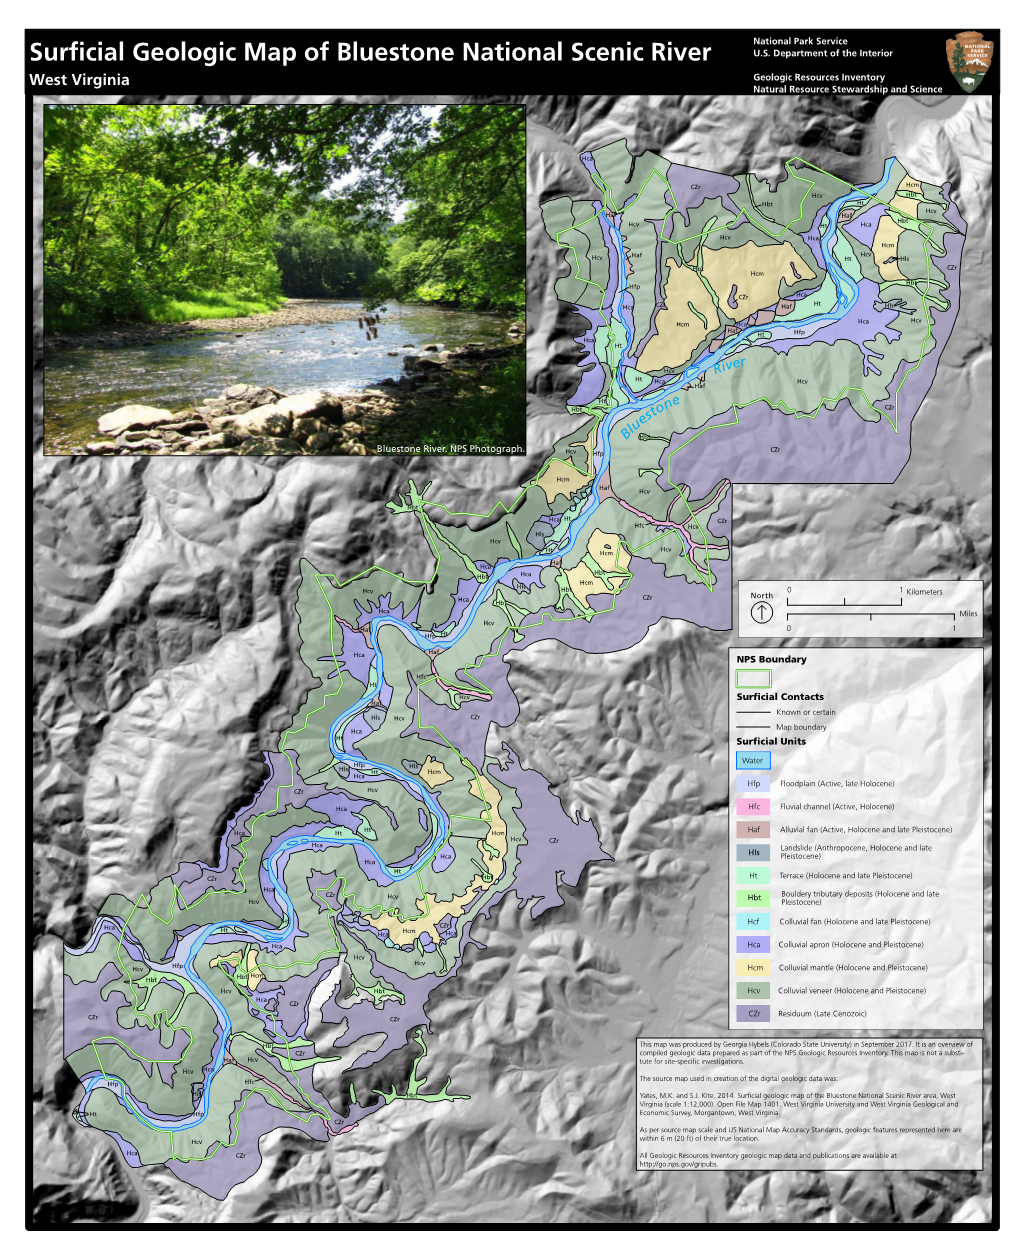 Surficial Geologic Map of Bluestone National Scenic River